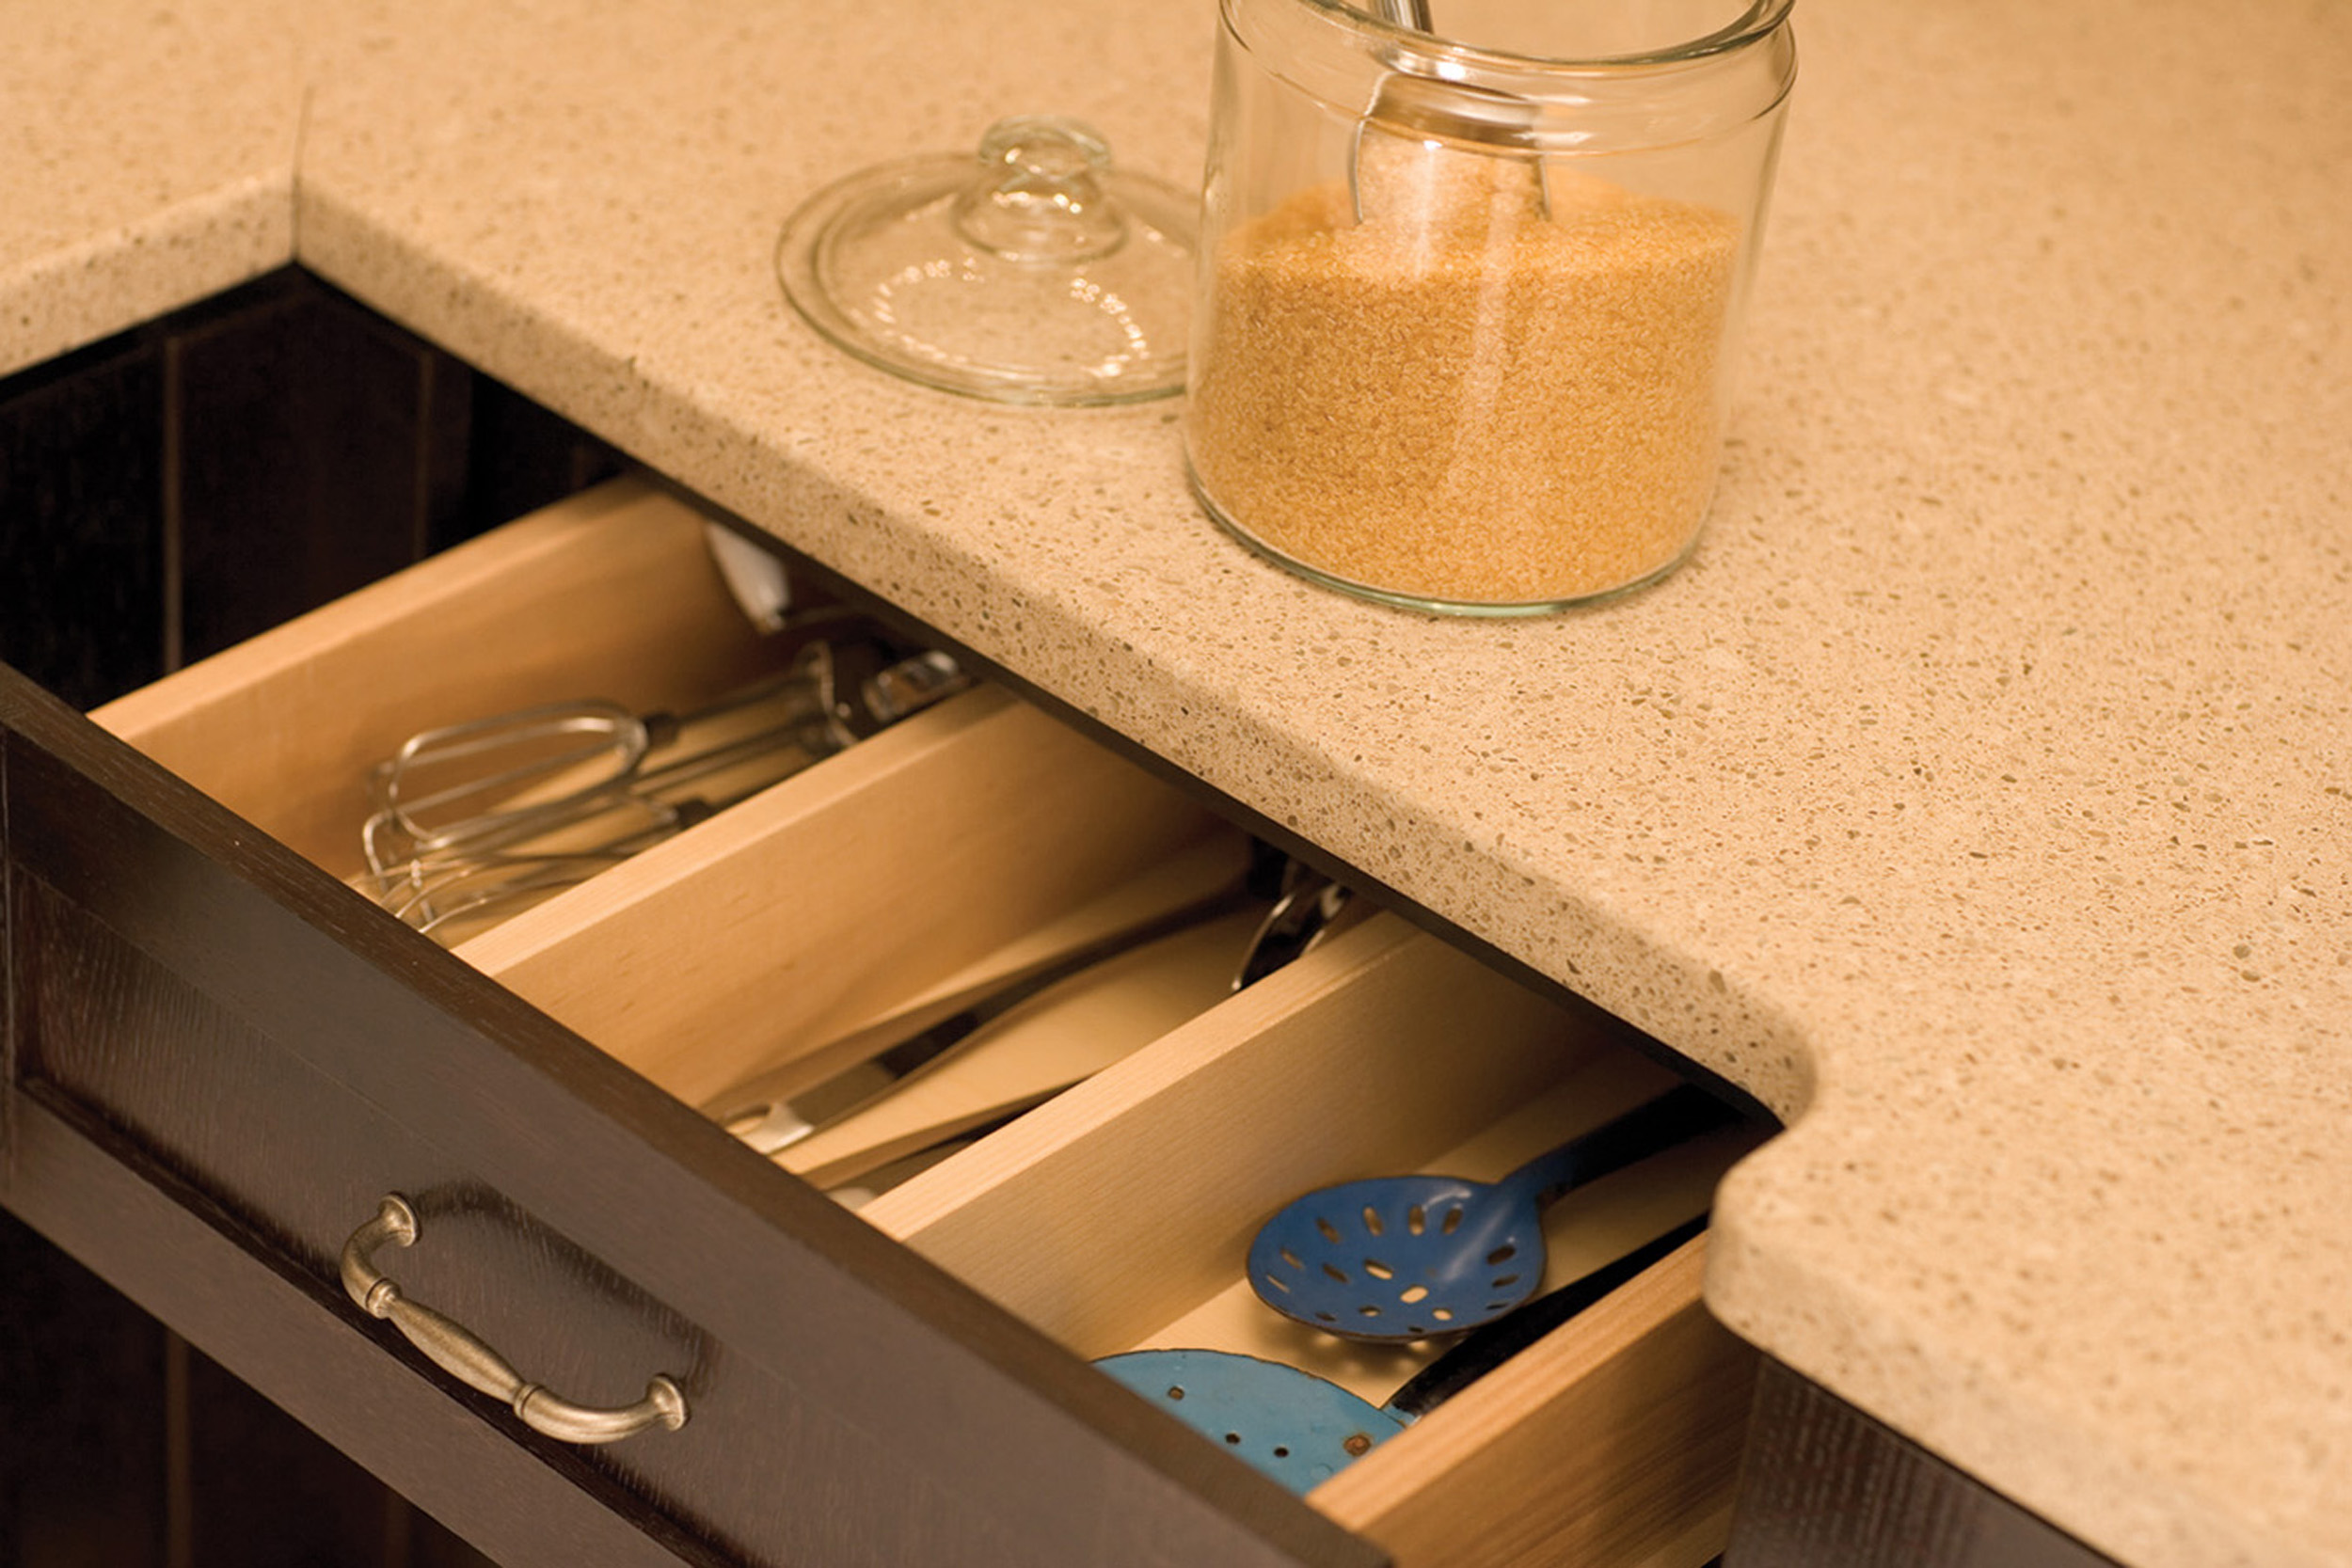 Drawer partitions can be specified to divide a drawer based on your personal preferences. Kitchen Drawer Storage from Dura Supreme Cabinetry.